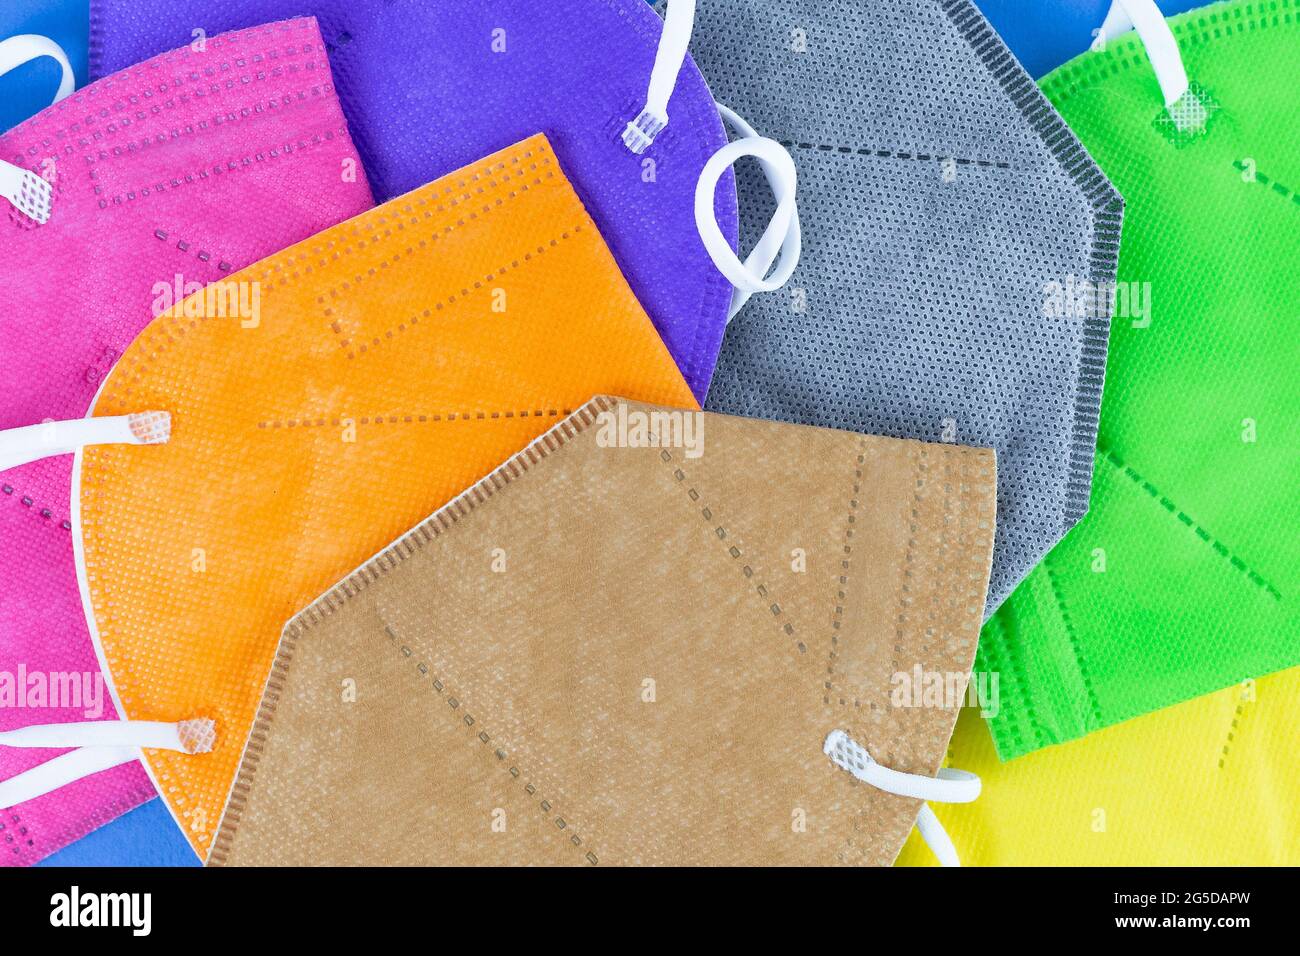 Heap of  different colors FFP2 or N95 face masks respirators on blue background. Top view flat layer. Protection from covid virus during pandemic. Stock Photo